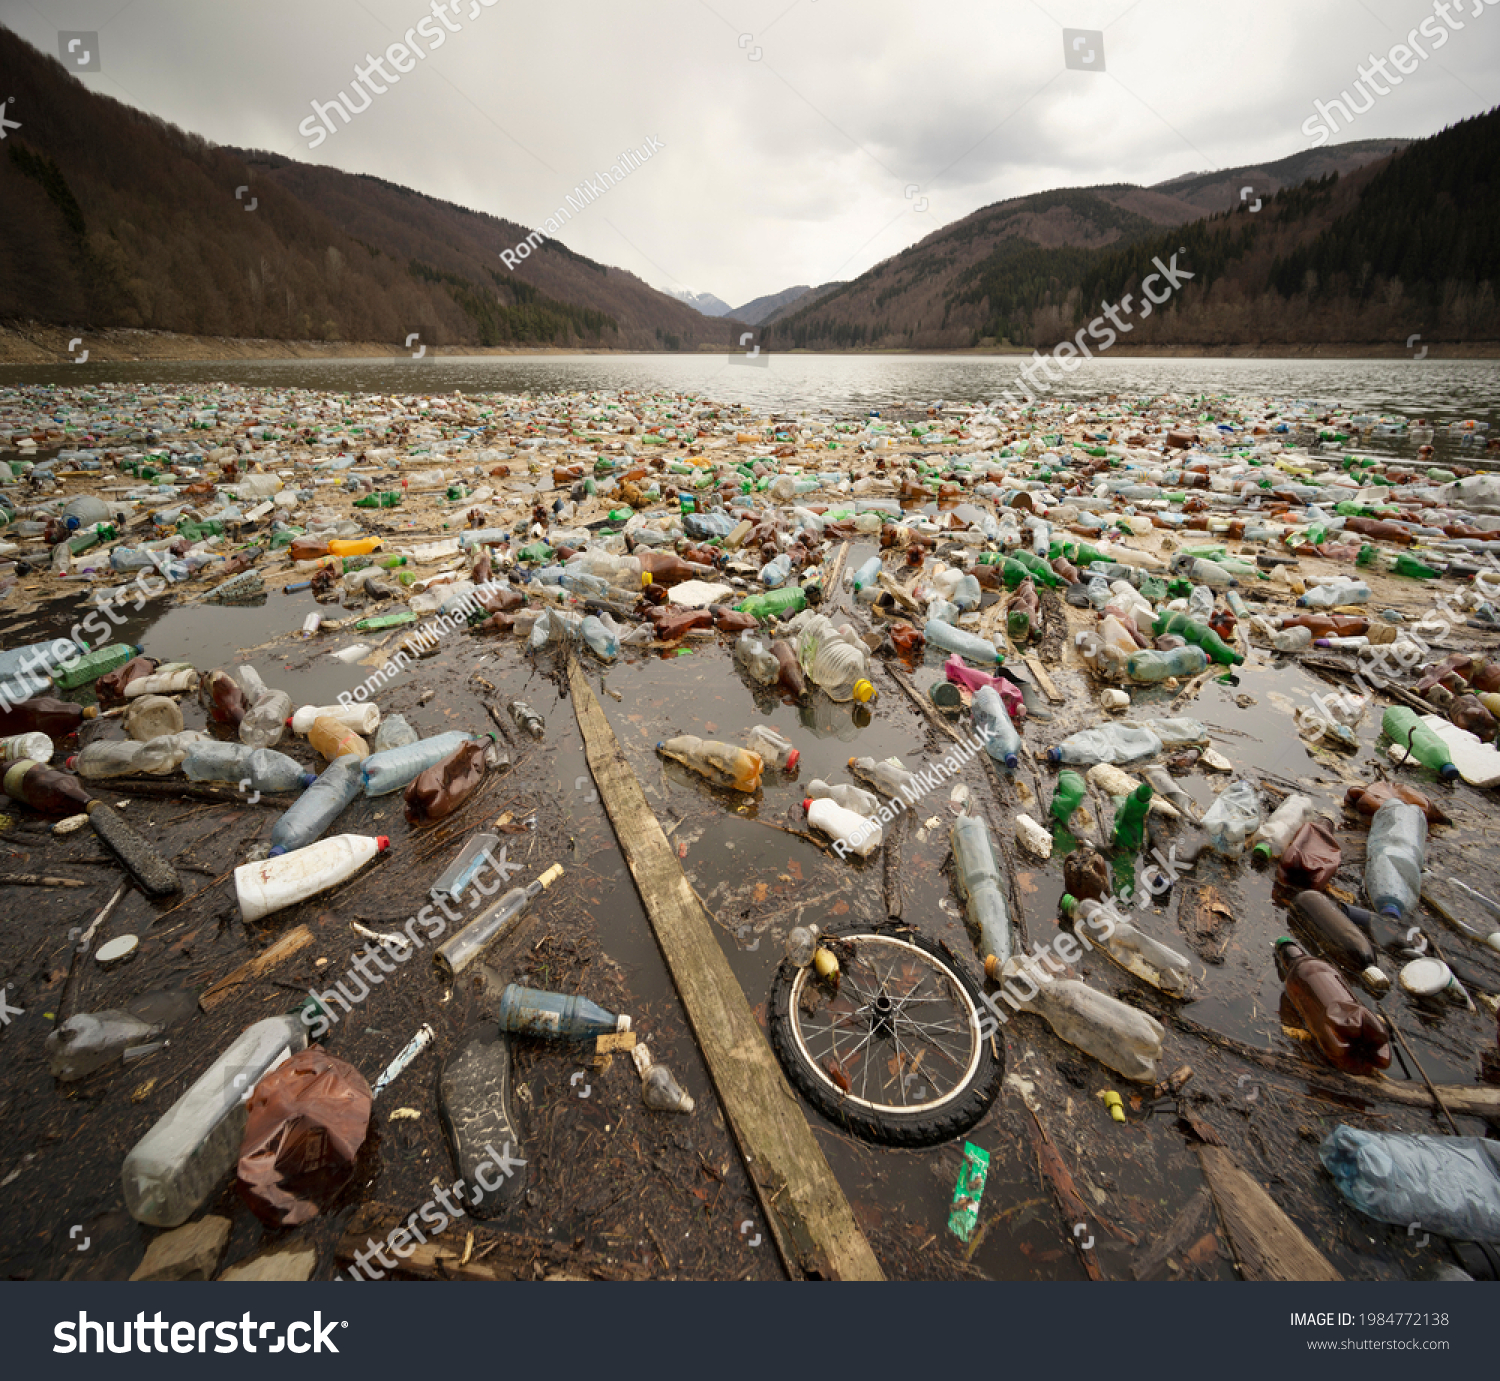 Environmental disaster in Transcarpathia, Ukraine. Residents of mountain villages throw plastic waste directly into the rivers, which bring it to the reservoir and dump it on its banks. Low ecology. #1984772138